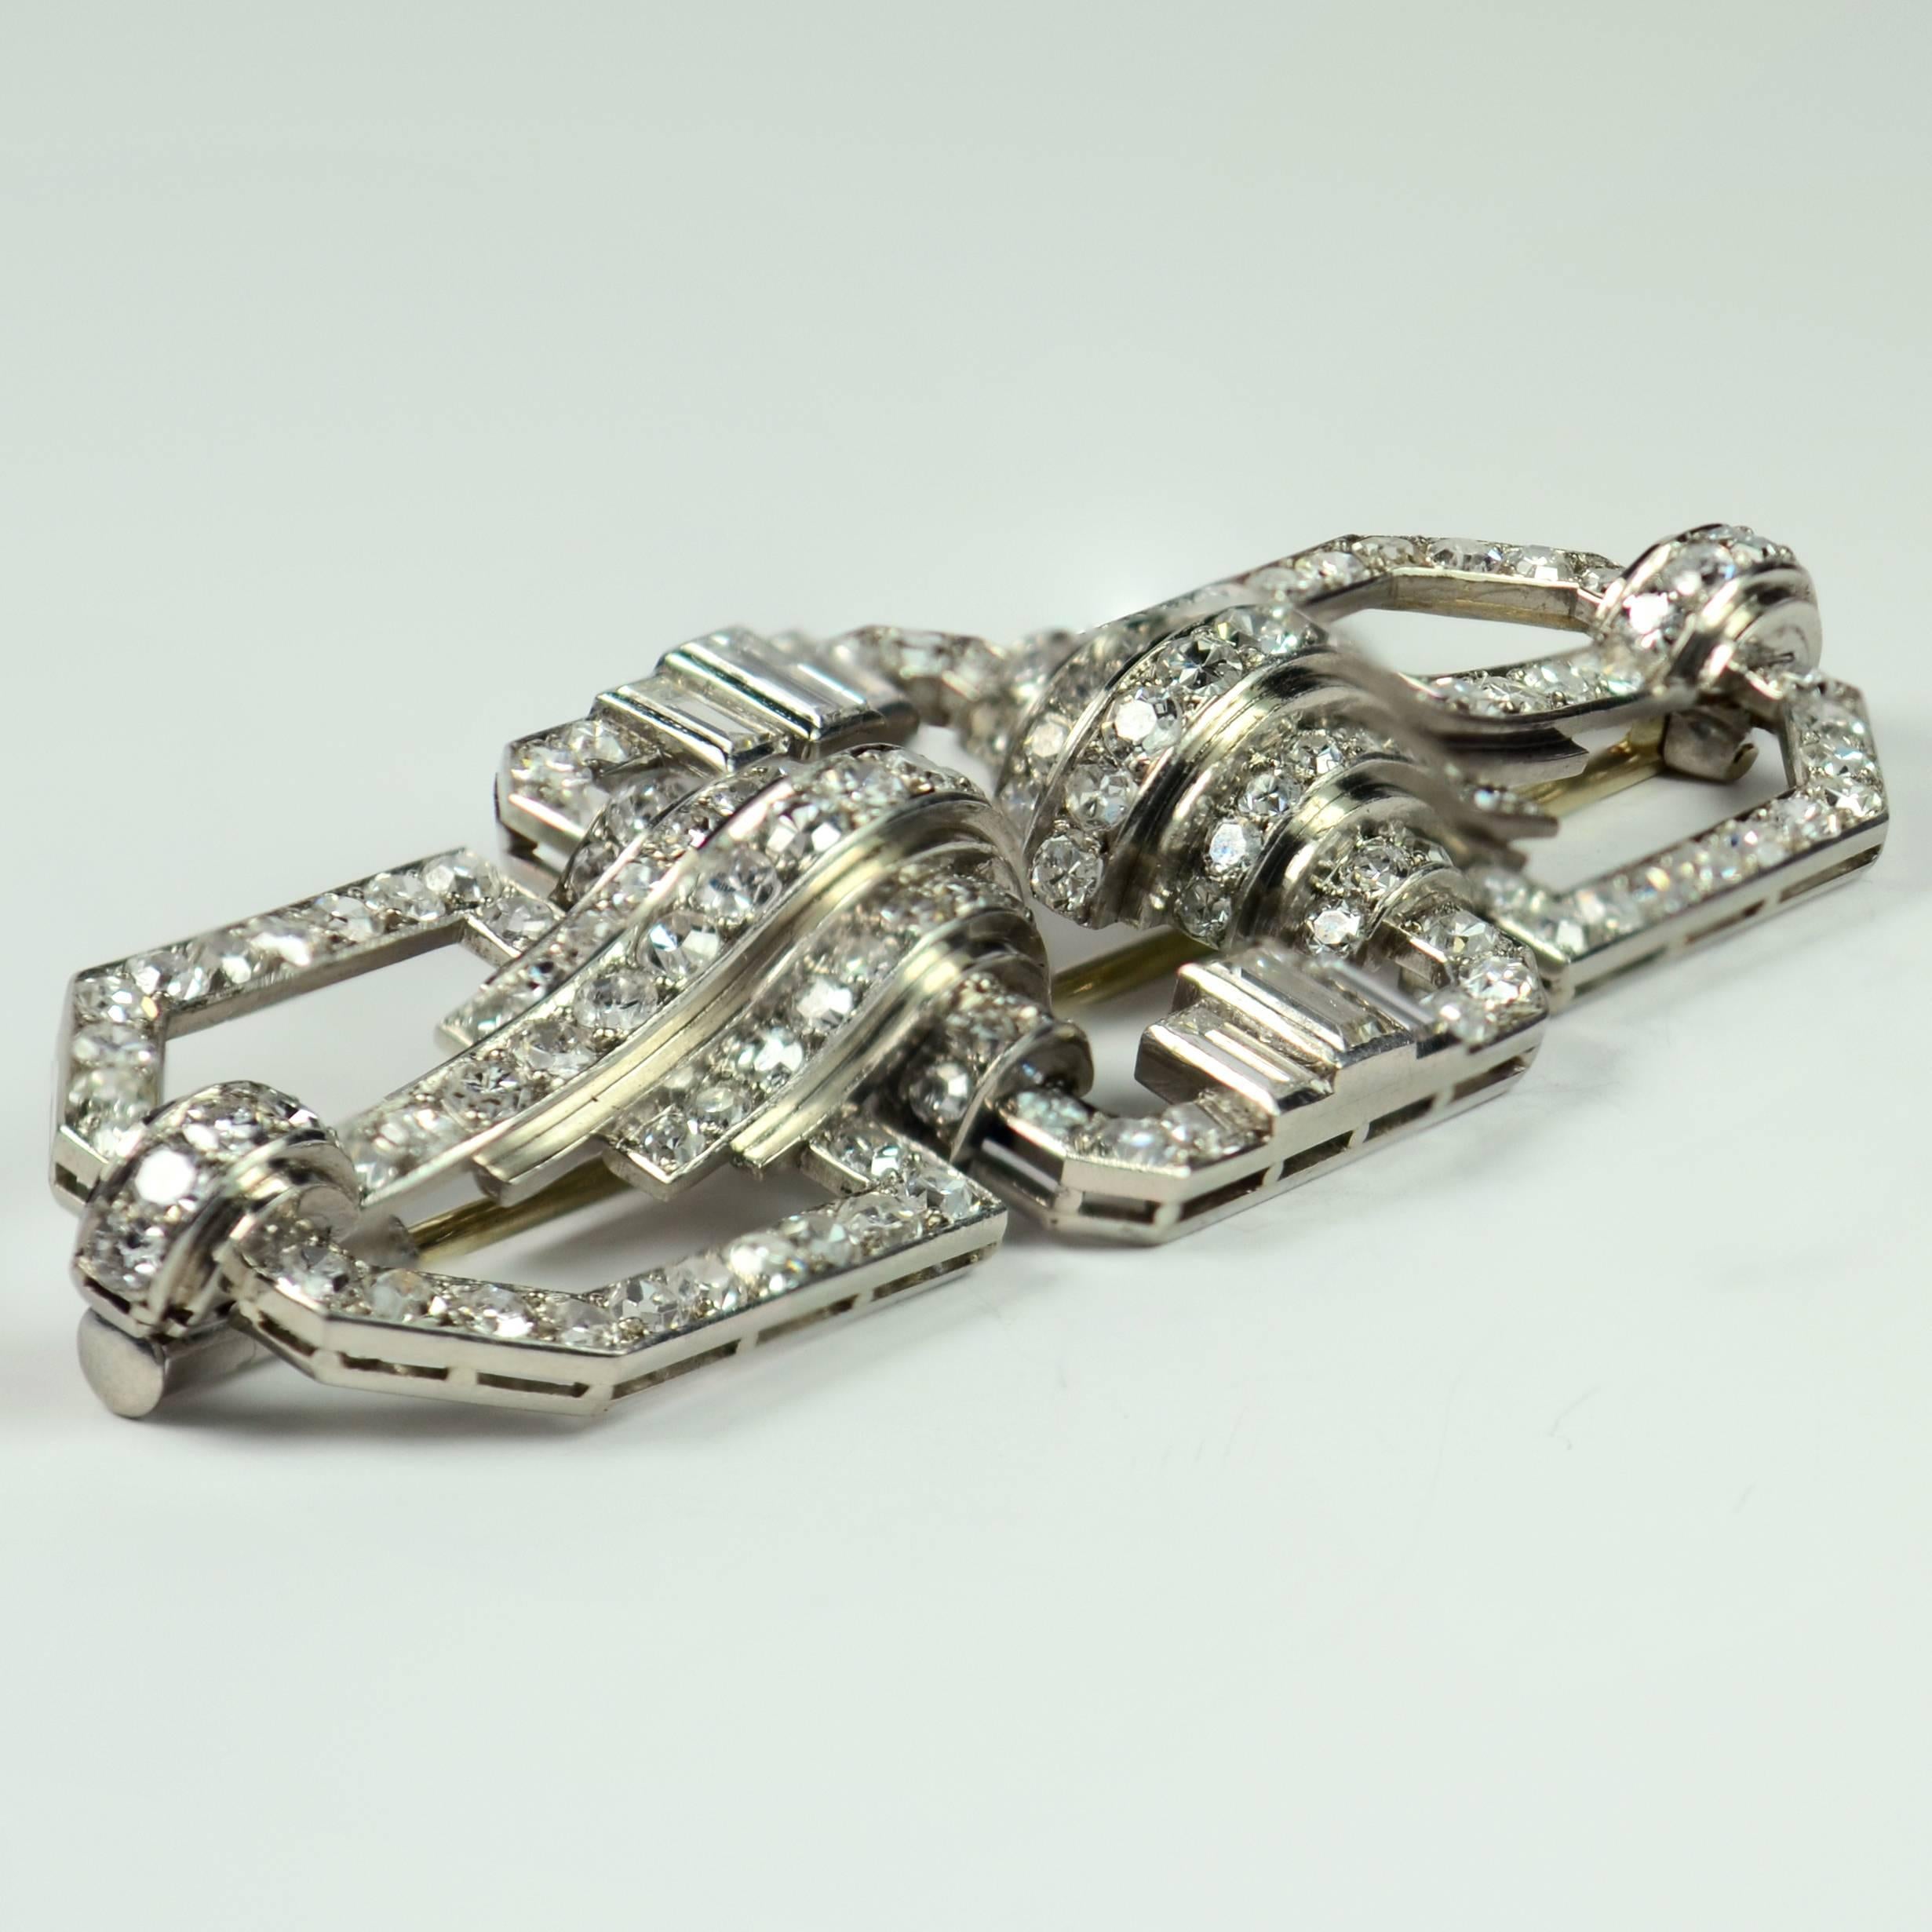 A stylish geometric brooch from the Art Deco era in platinum and diamonds. Set with 148 round single-cut diamonds and 6 baguette cut diamonds with a total approximate weight of 5.50 carats. The diamonds are clean and bright.

The body of the brooch